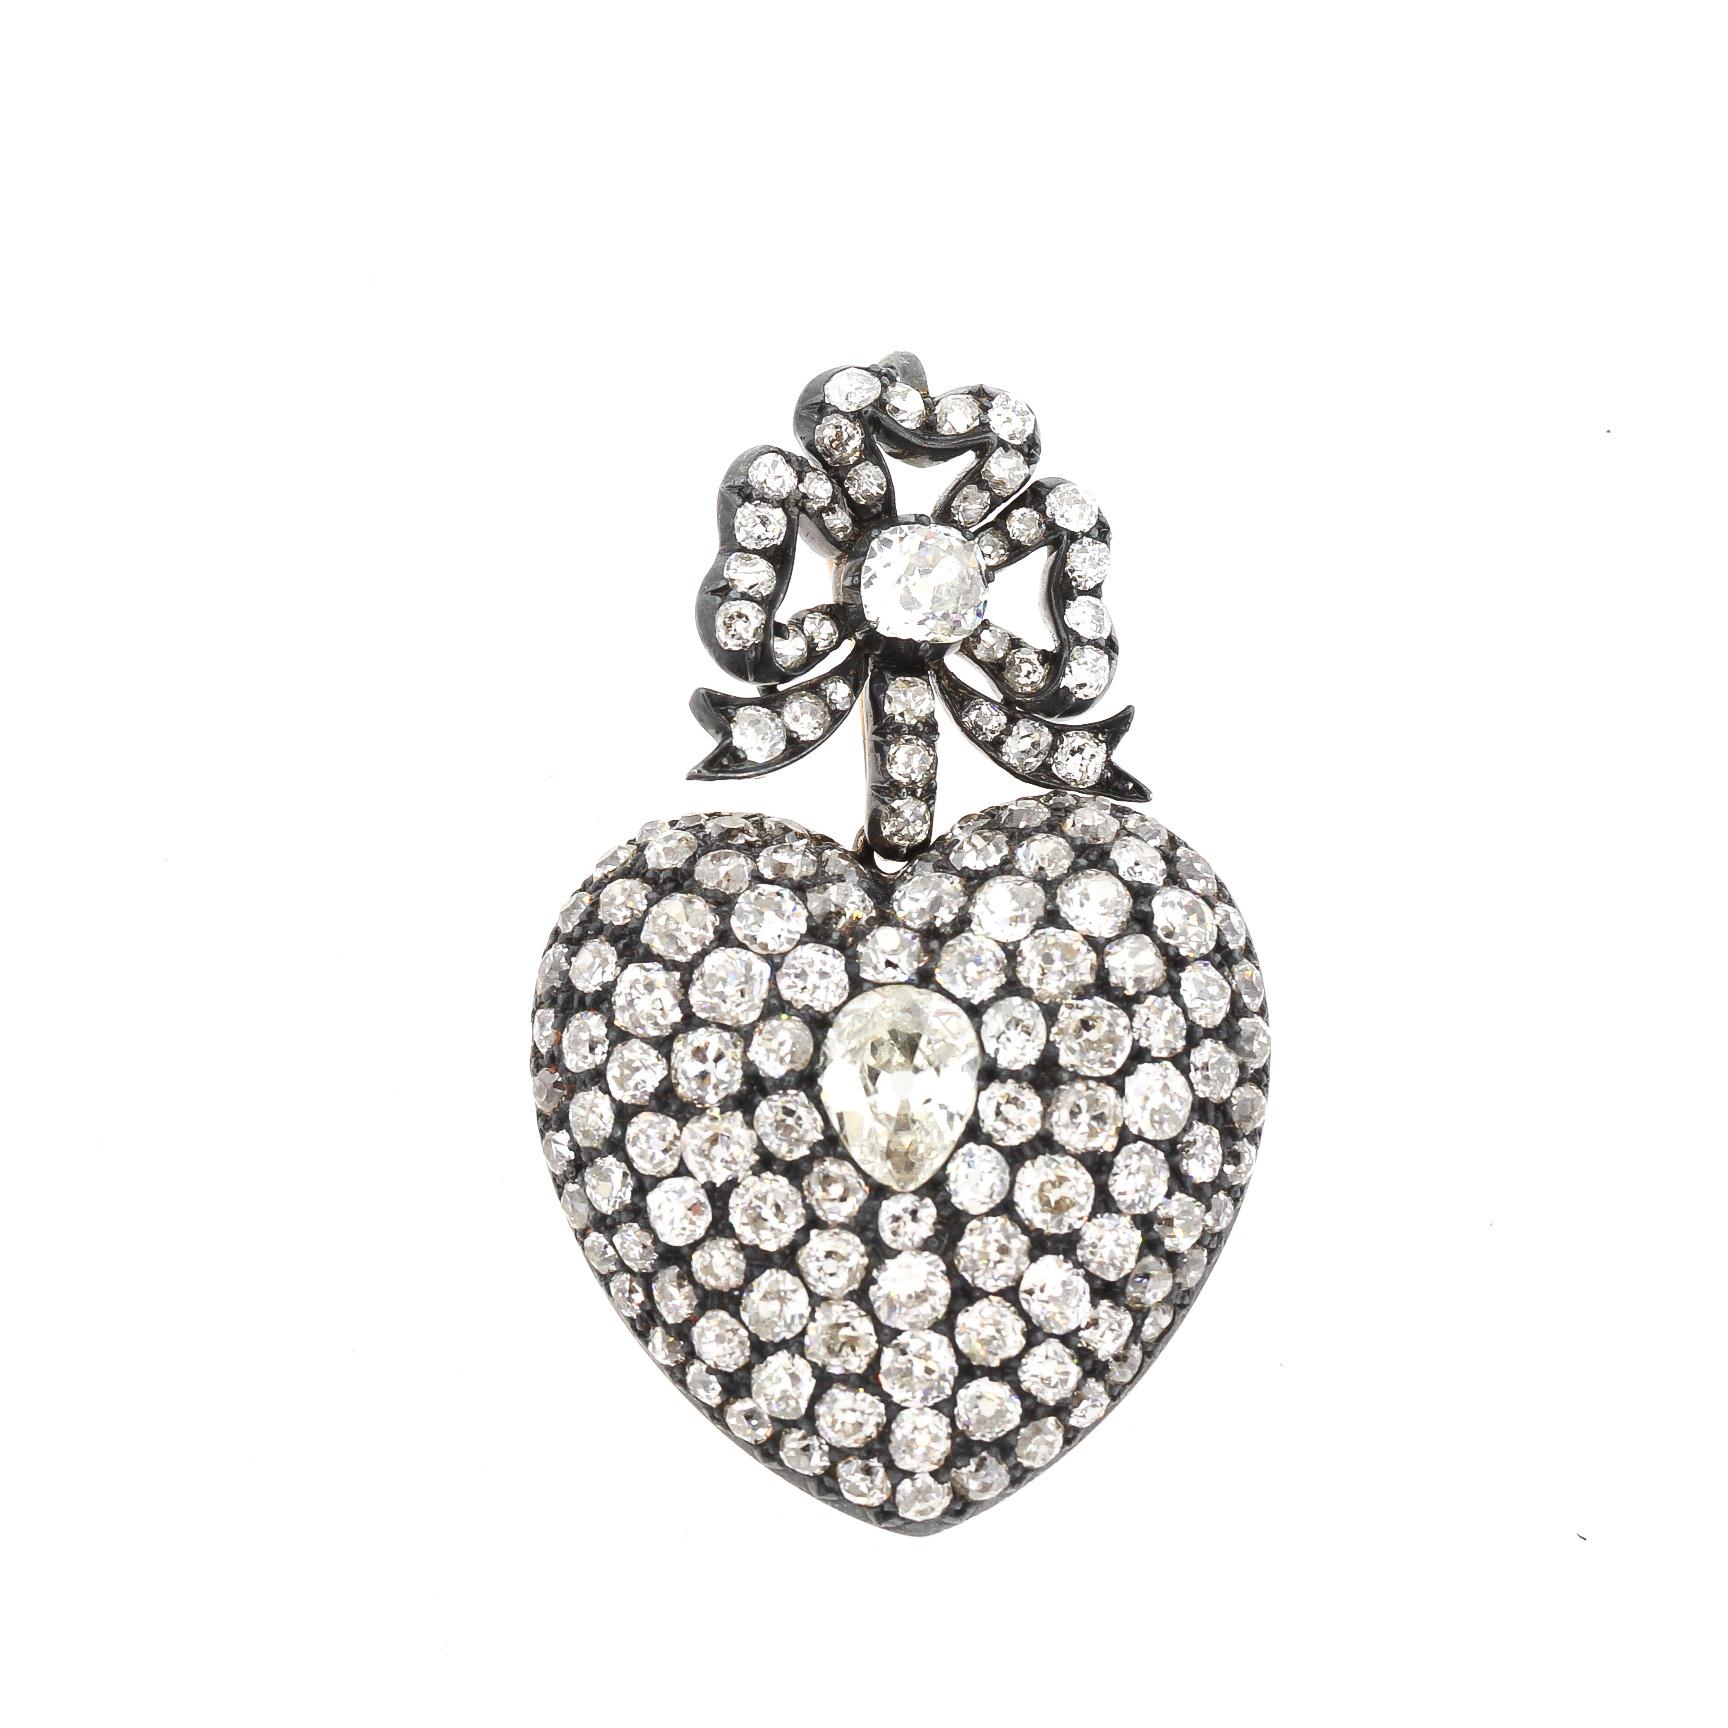 A romantic large scale antique old mine cut diamond heart pendant made around 1890. The heart is suspended from a removable diamond bow and is set with approximately 16 carats of diamonds. The center pear shape diamond weighs approximately 1.30